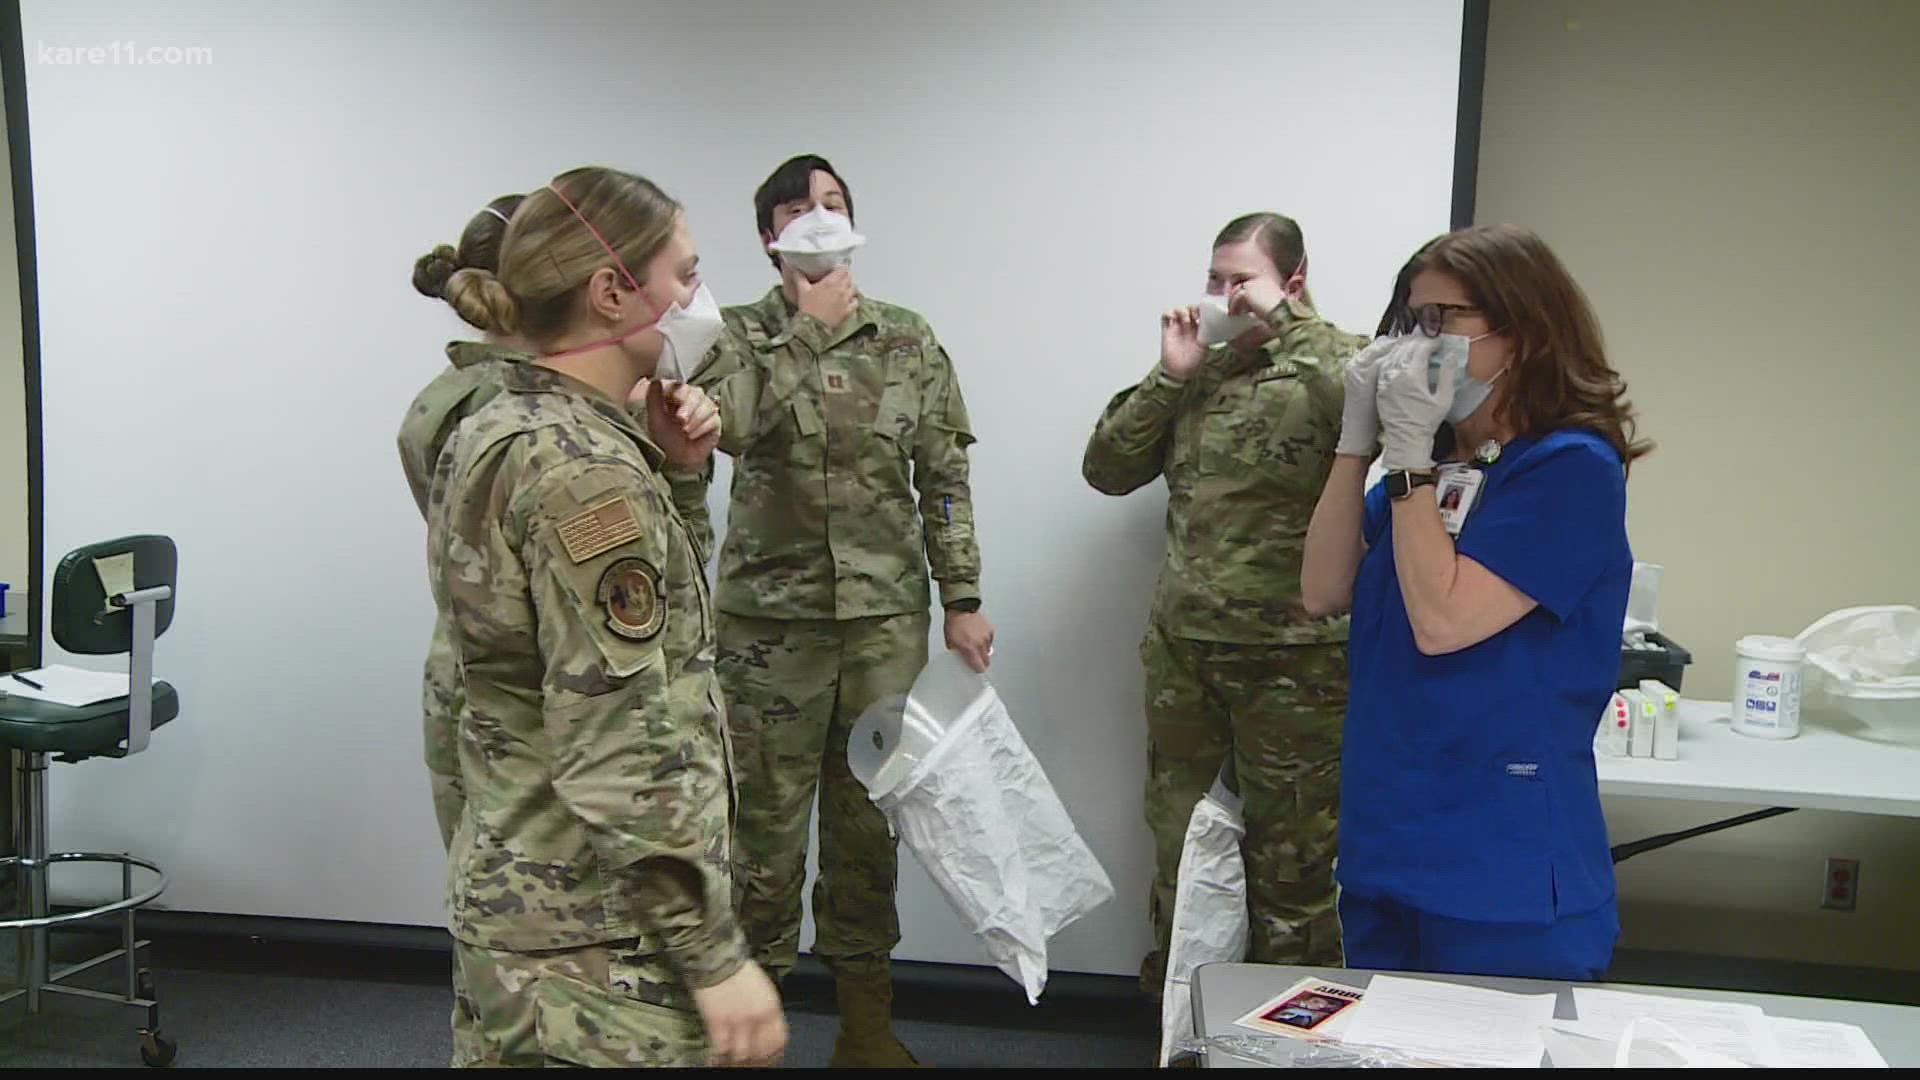 According to officials, at least 400 National Guard members will be trained in to help medical personnel care for more patients.